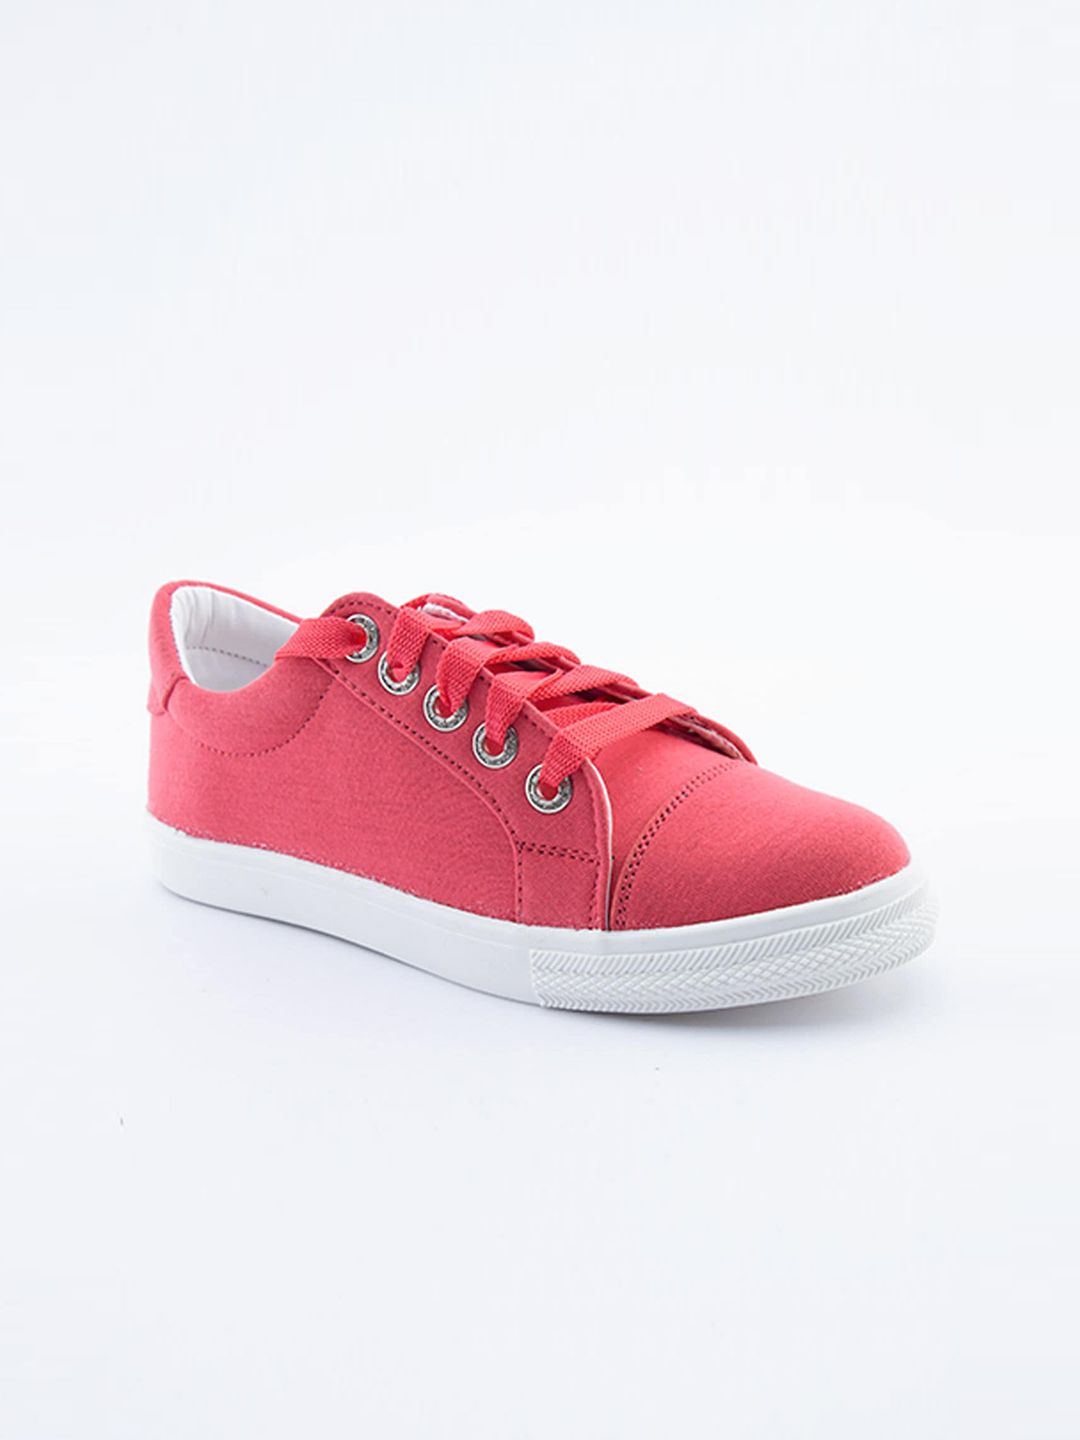 IMT Women Pink Sneakers Price in India